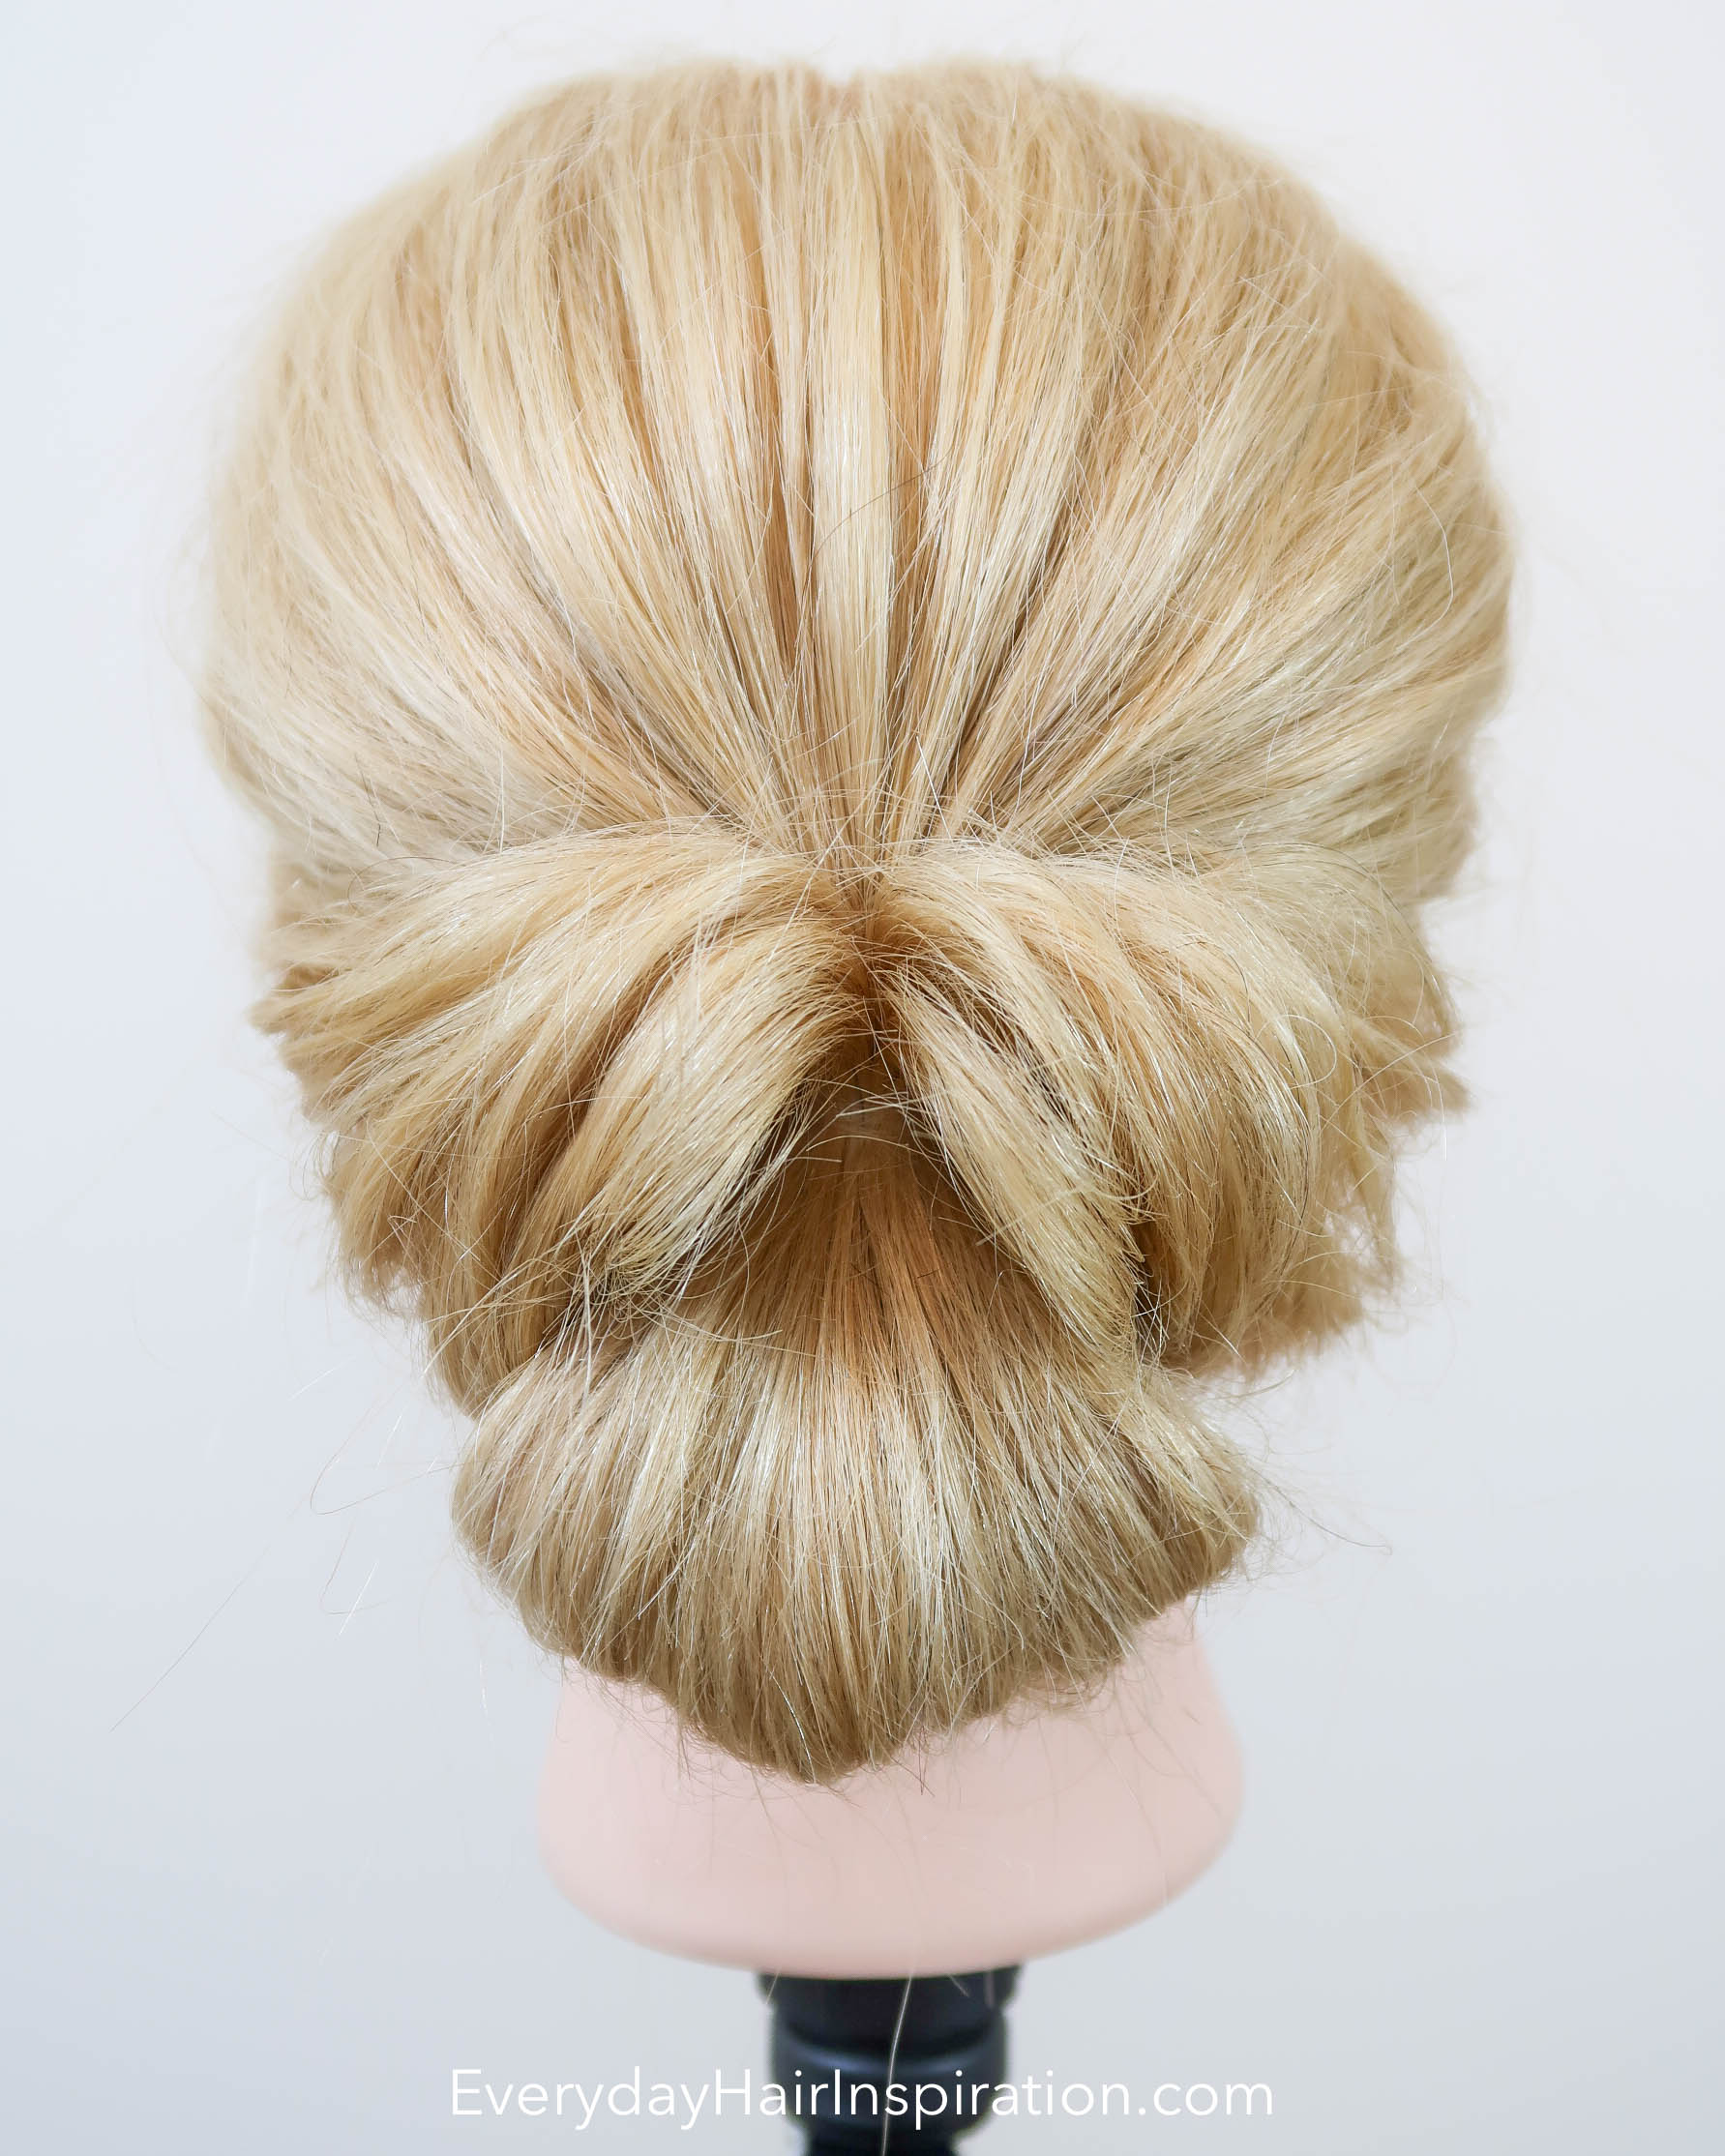 20+ Topsy Tail Hairstyles for Any Age - Babes In Hairland